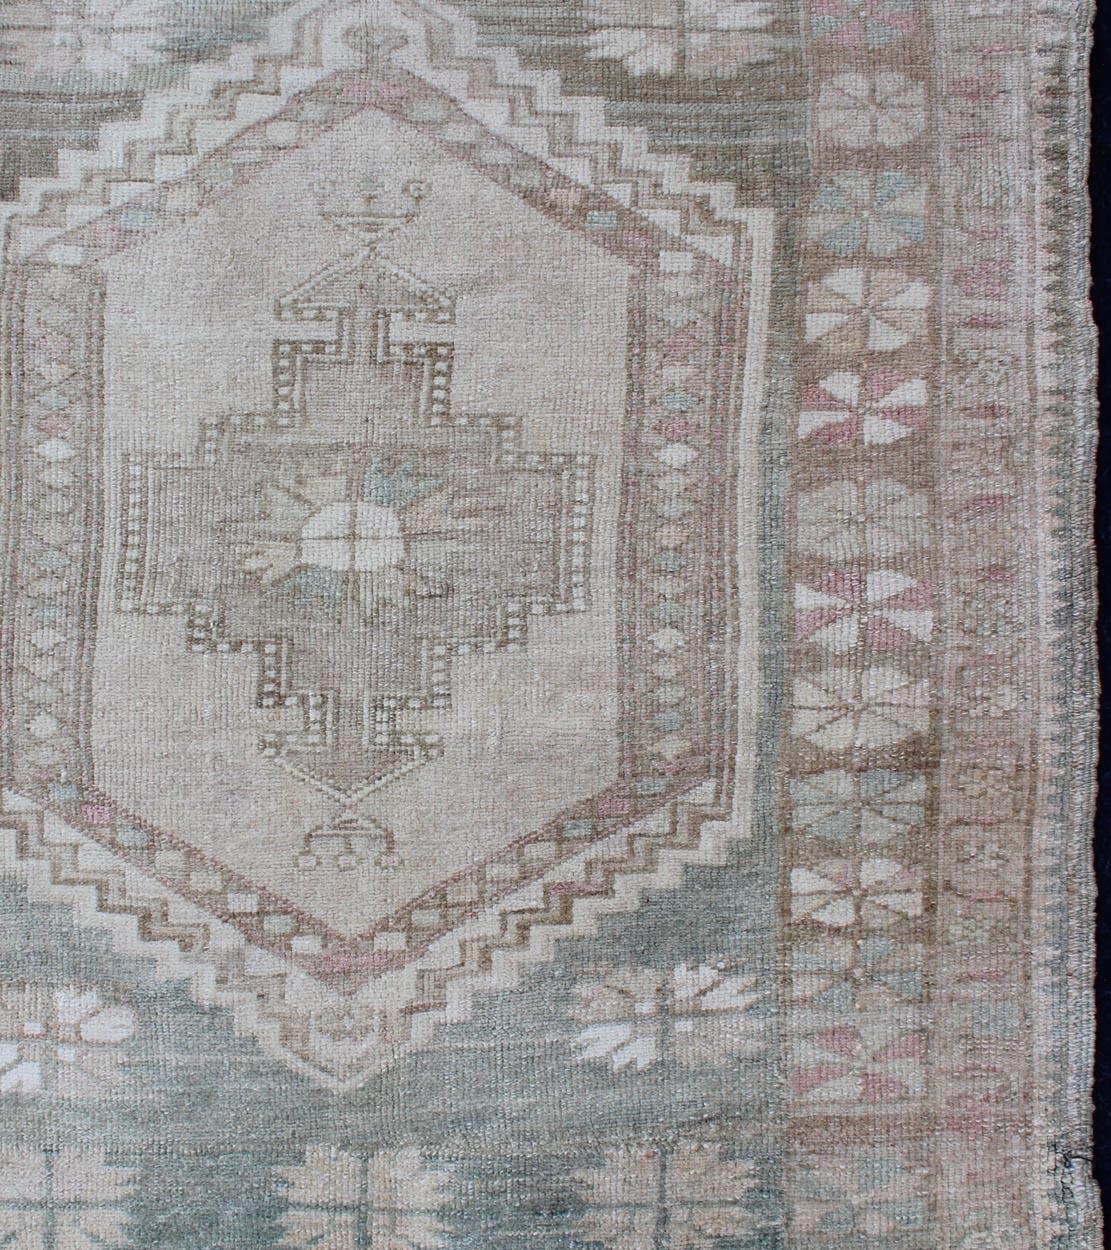 Square size vintage Turkish Oushak rug with stylized medallion in tan, cream and light green, rug EN-176982, country of origin / type: Turkey / Oushak, circa 1940

This Turkish vintage Oushak rug, circa 1940 features an intricately beautiful and